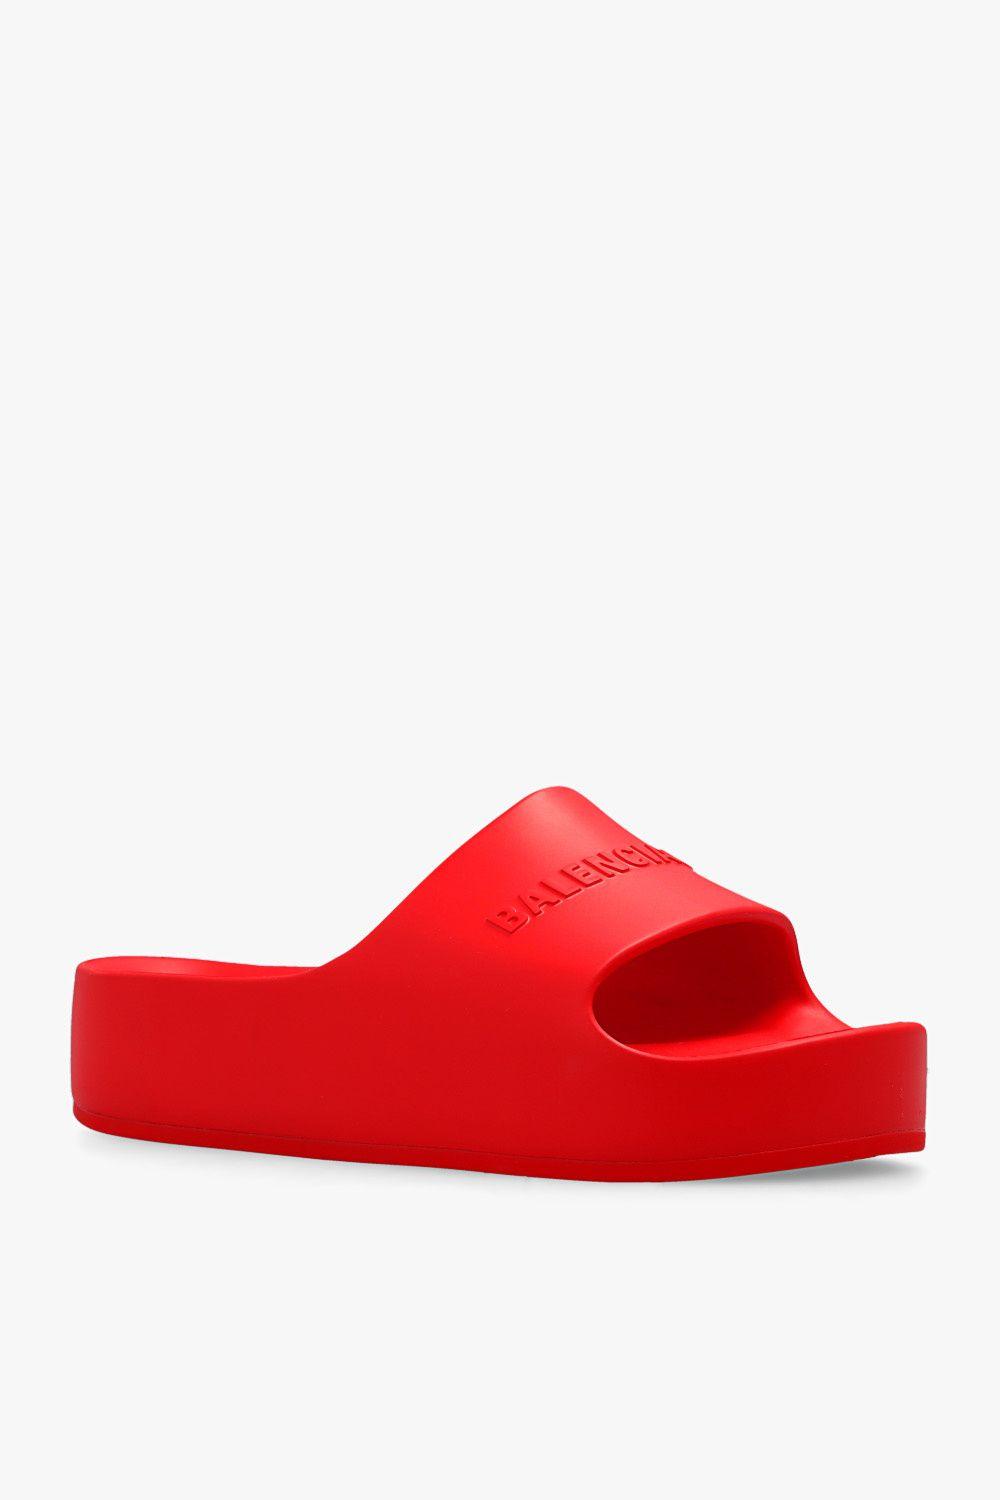 Balenciaga 'chunky' Slides in Red | Lyst